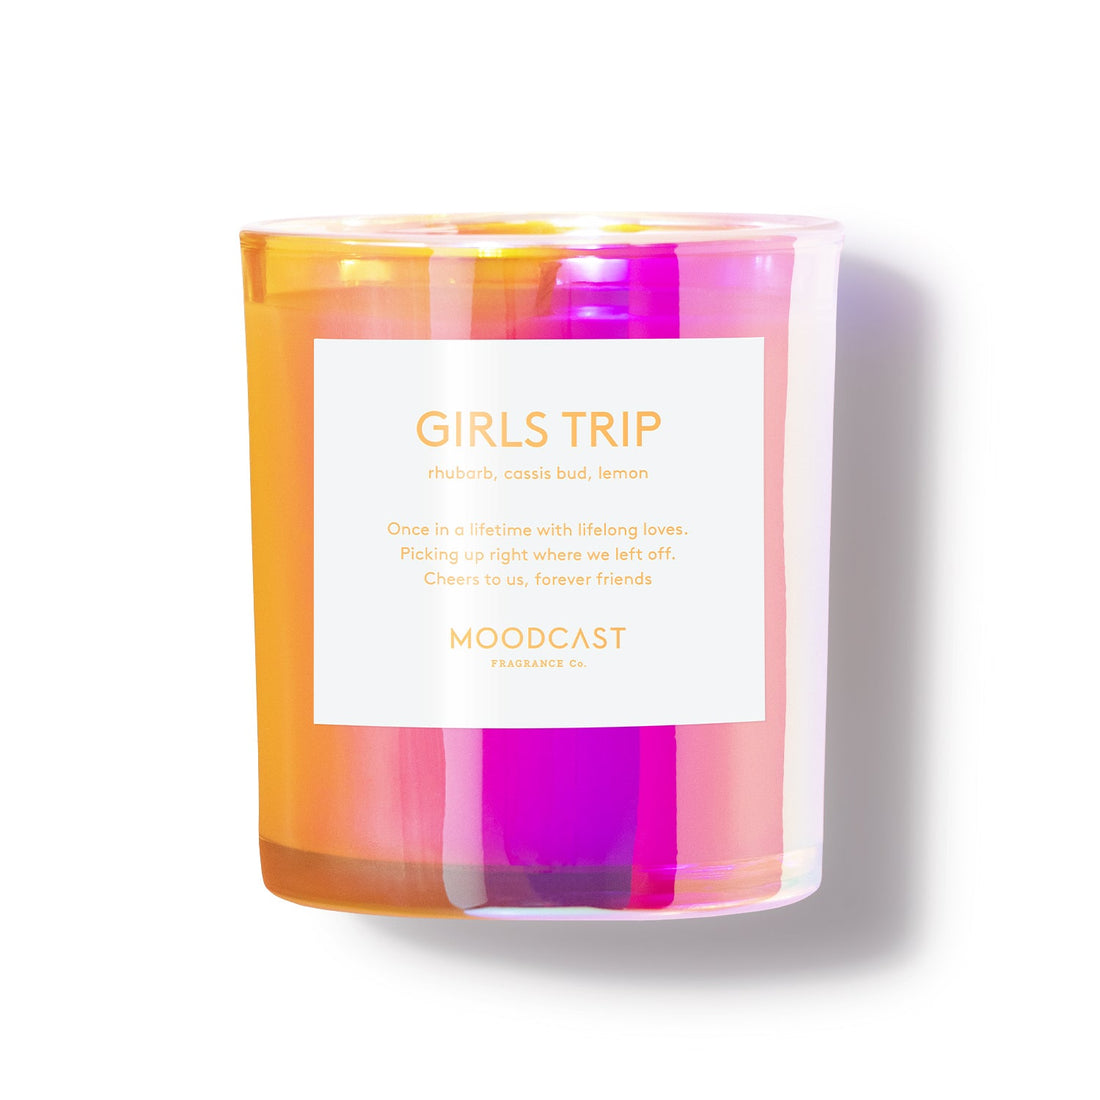 Girls Trip - Vibes Collection (Iridescent) - 8oz/227g Coconut Wax Blend Glass Jar Candle - Key Notes: Rhubarb, Cassis Bud, Lemon